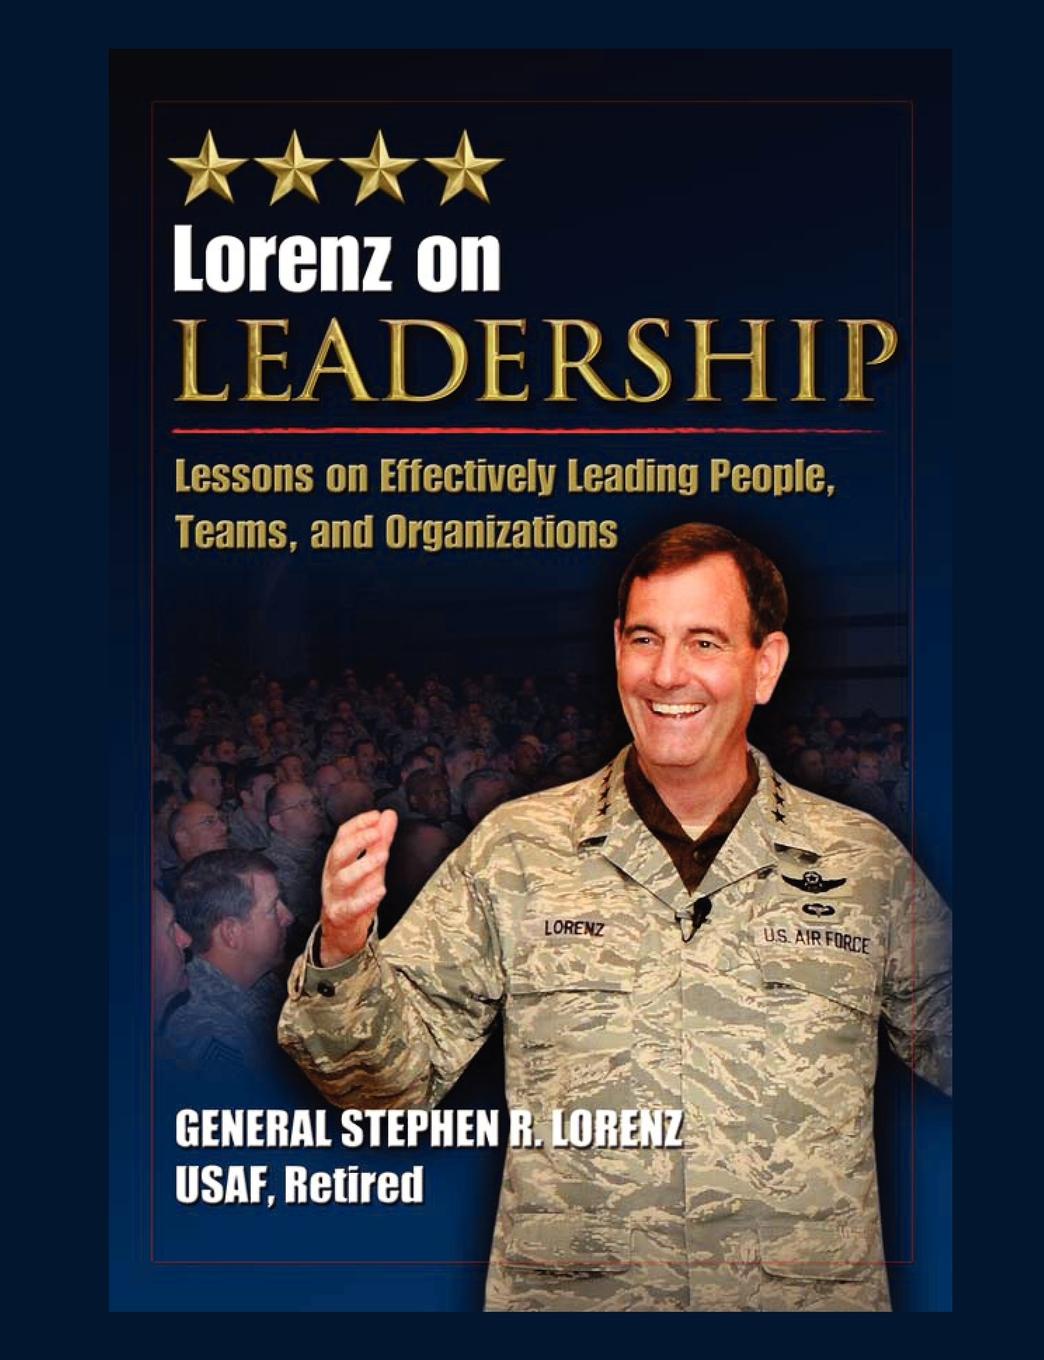 Lorenz on Leadership. Lessons on Effectively Leading People, Teams and Organizations